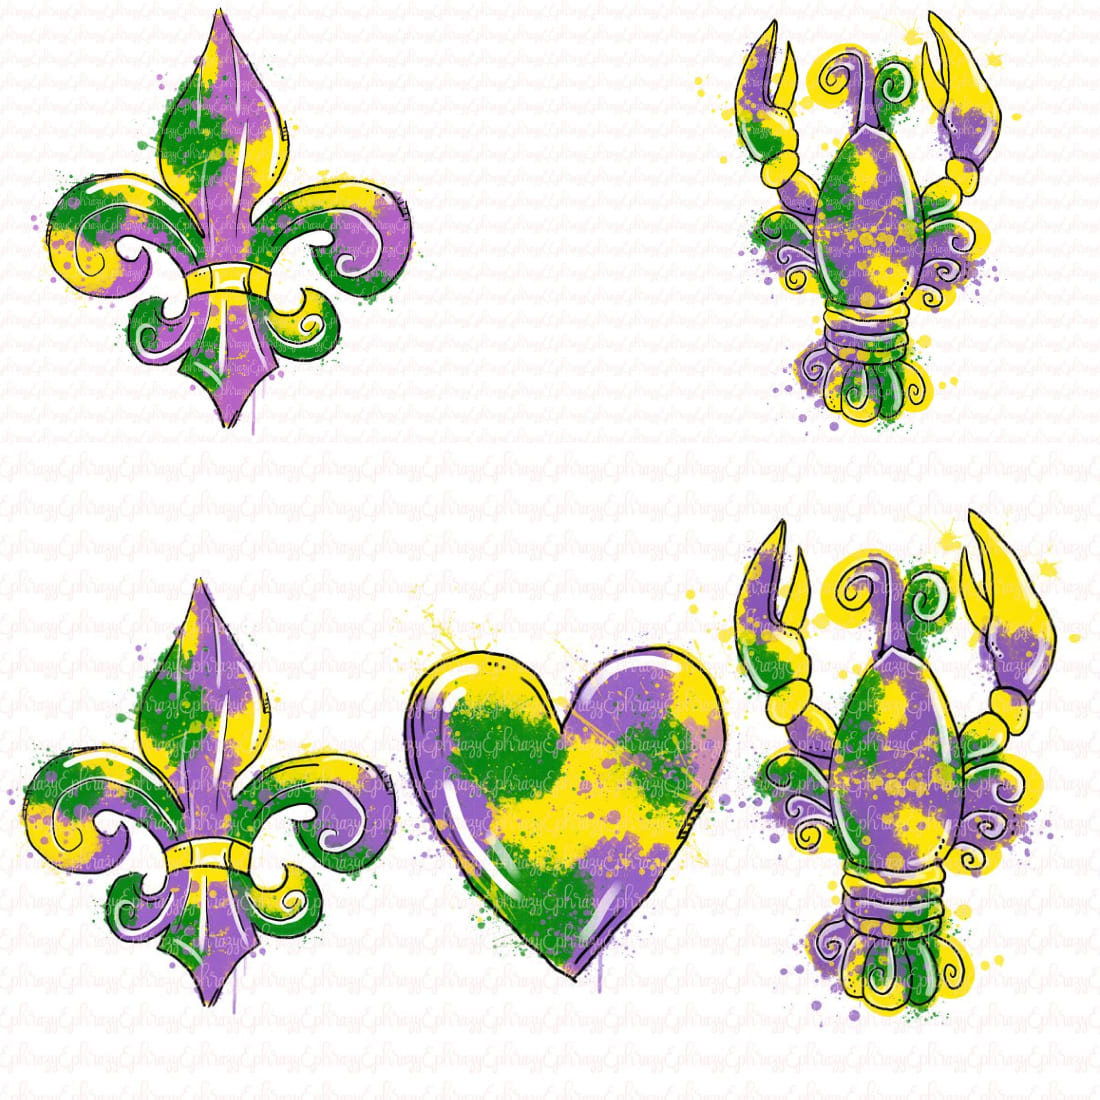 Five recurring elements are characteristic of the Mardi Gras celebration.